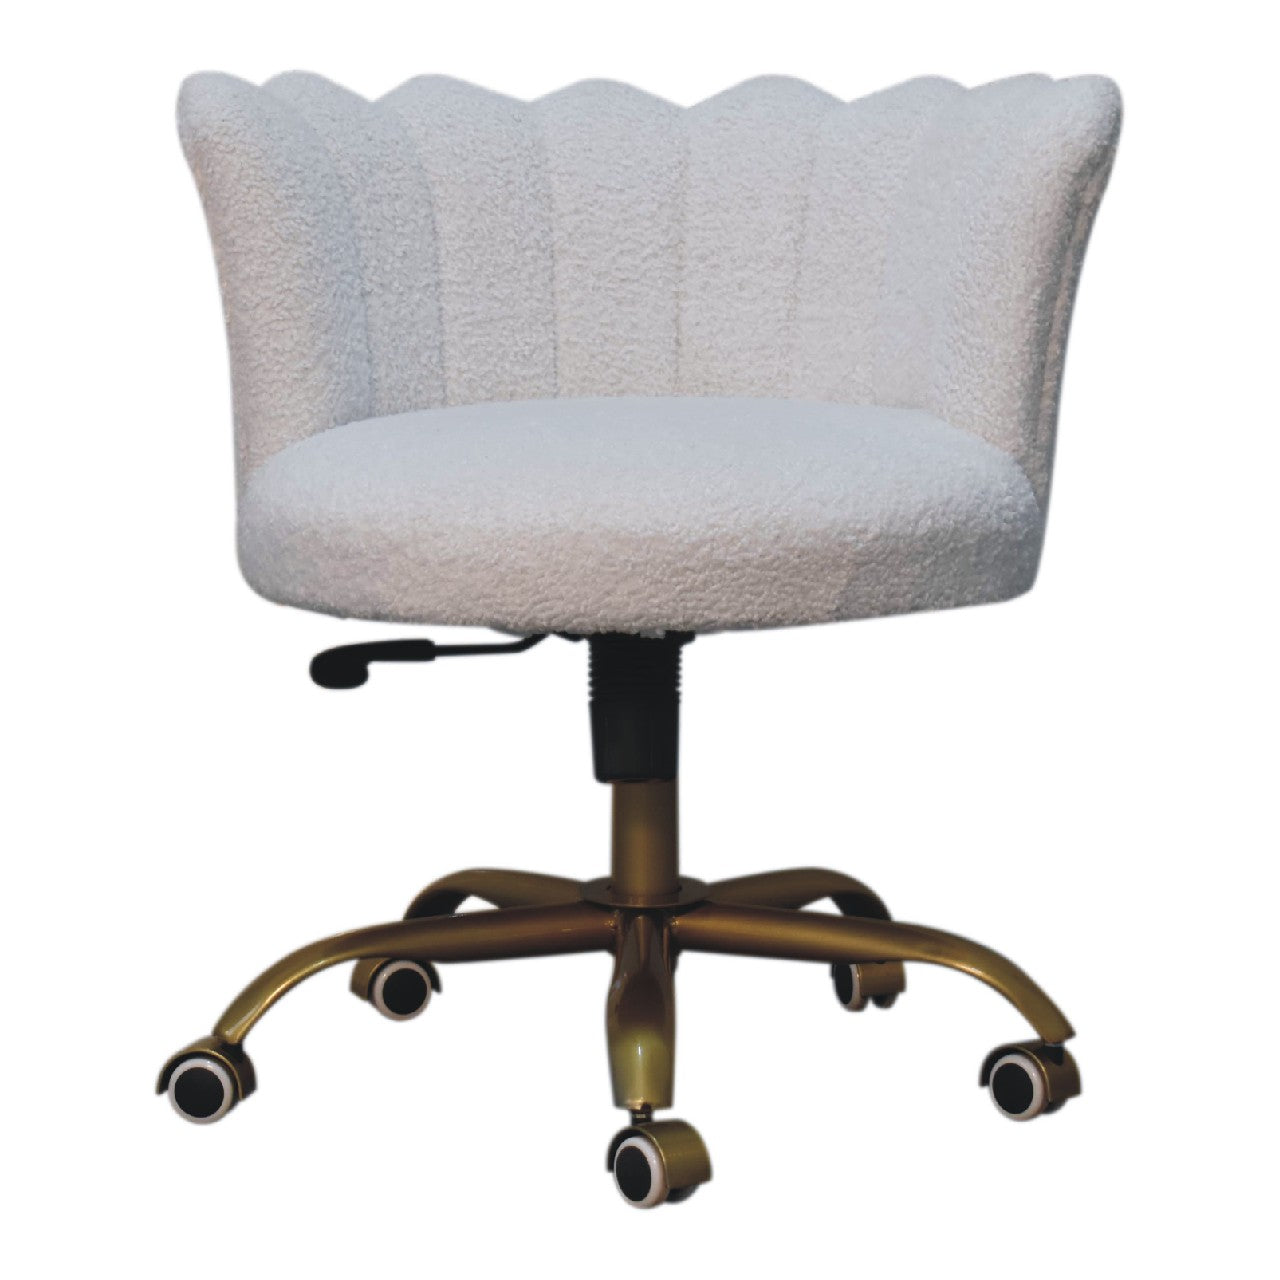 View White Boucle Swivel Chair information